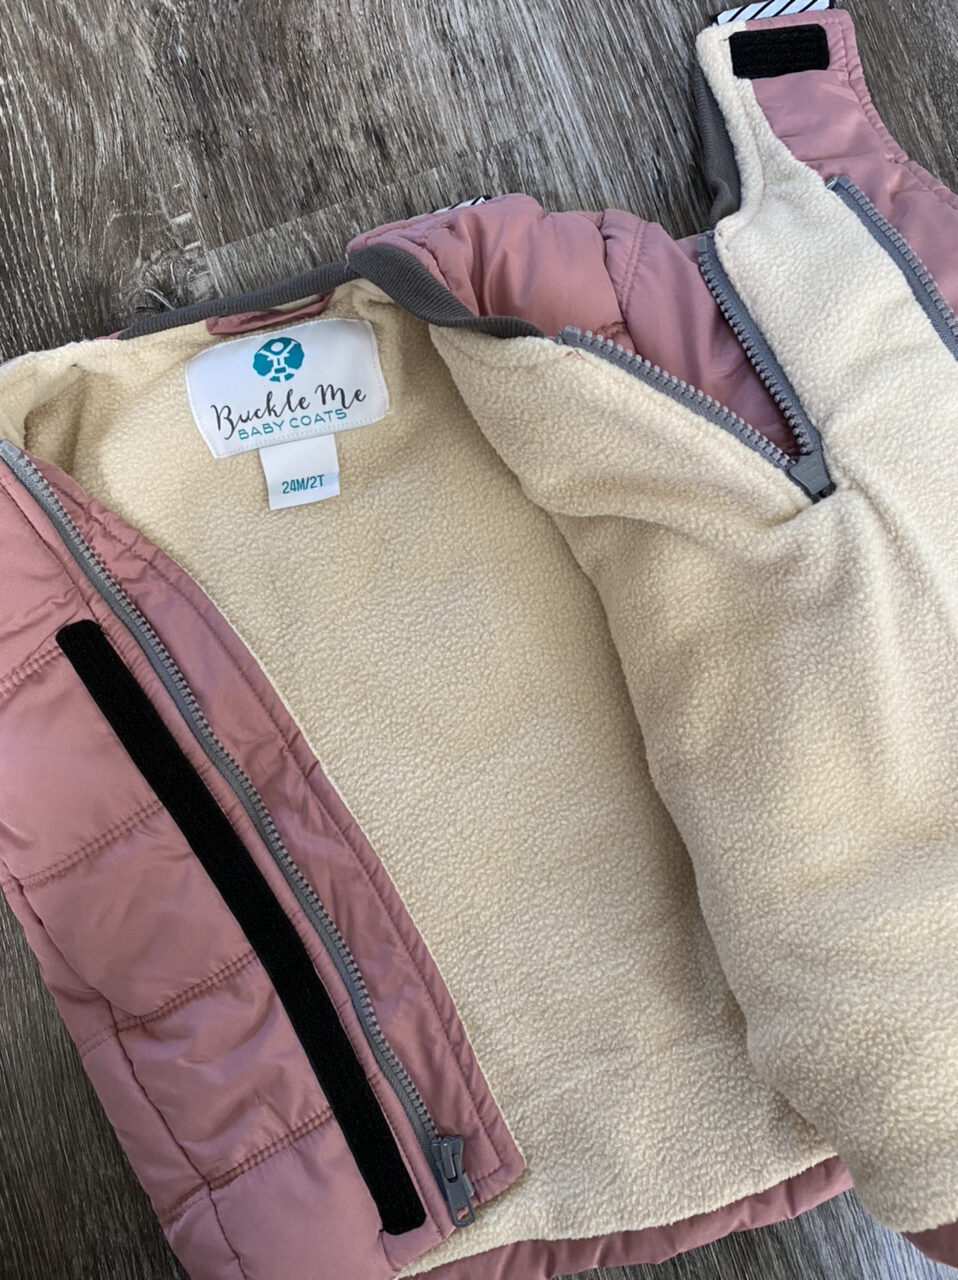 Toasty Car Seat Coat - 6 / Deepest of Oceans by Buckle Me Baby Coats